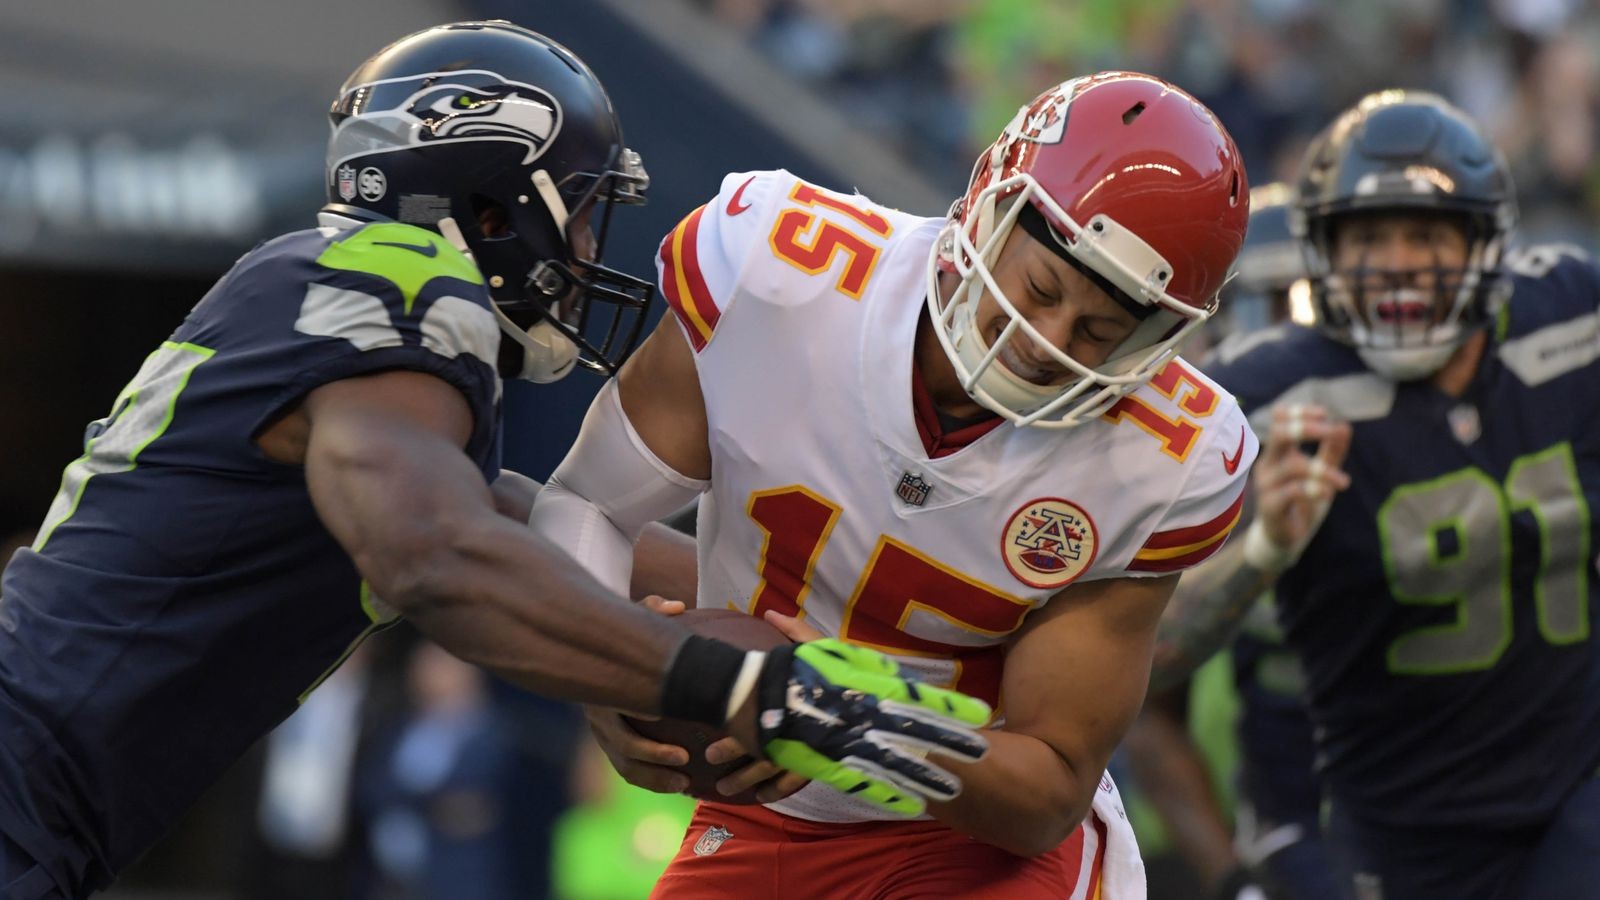 Kansas City Chiefs vs Seattle Seahawks: Game and score predictions